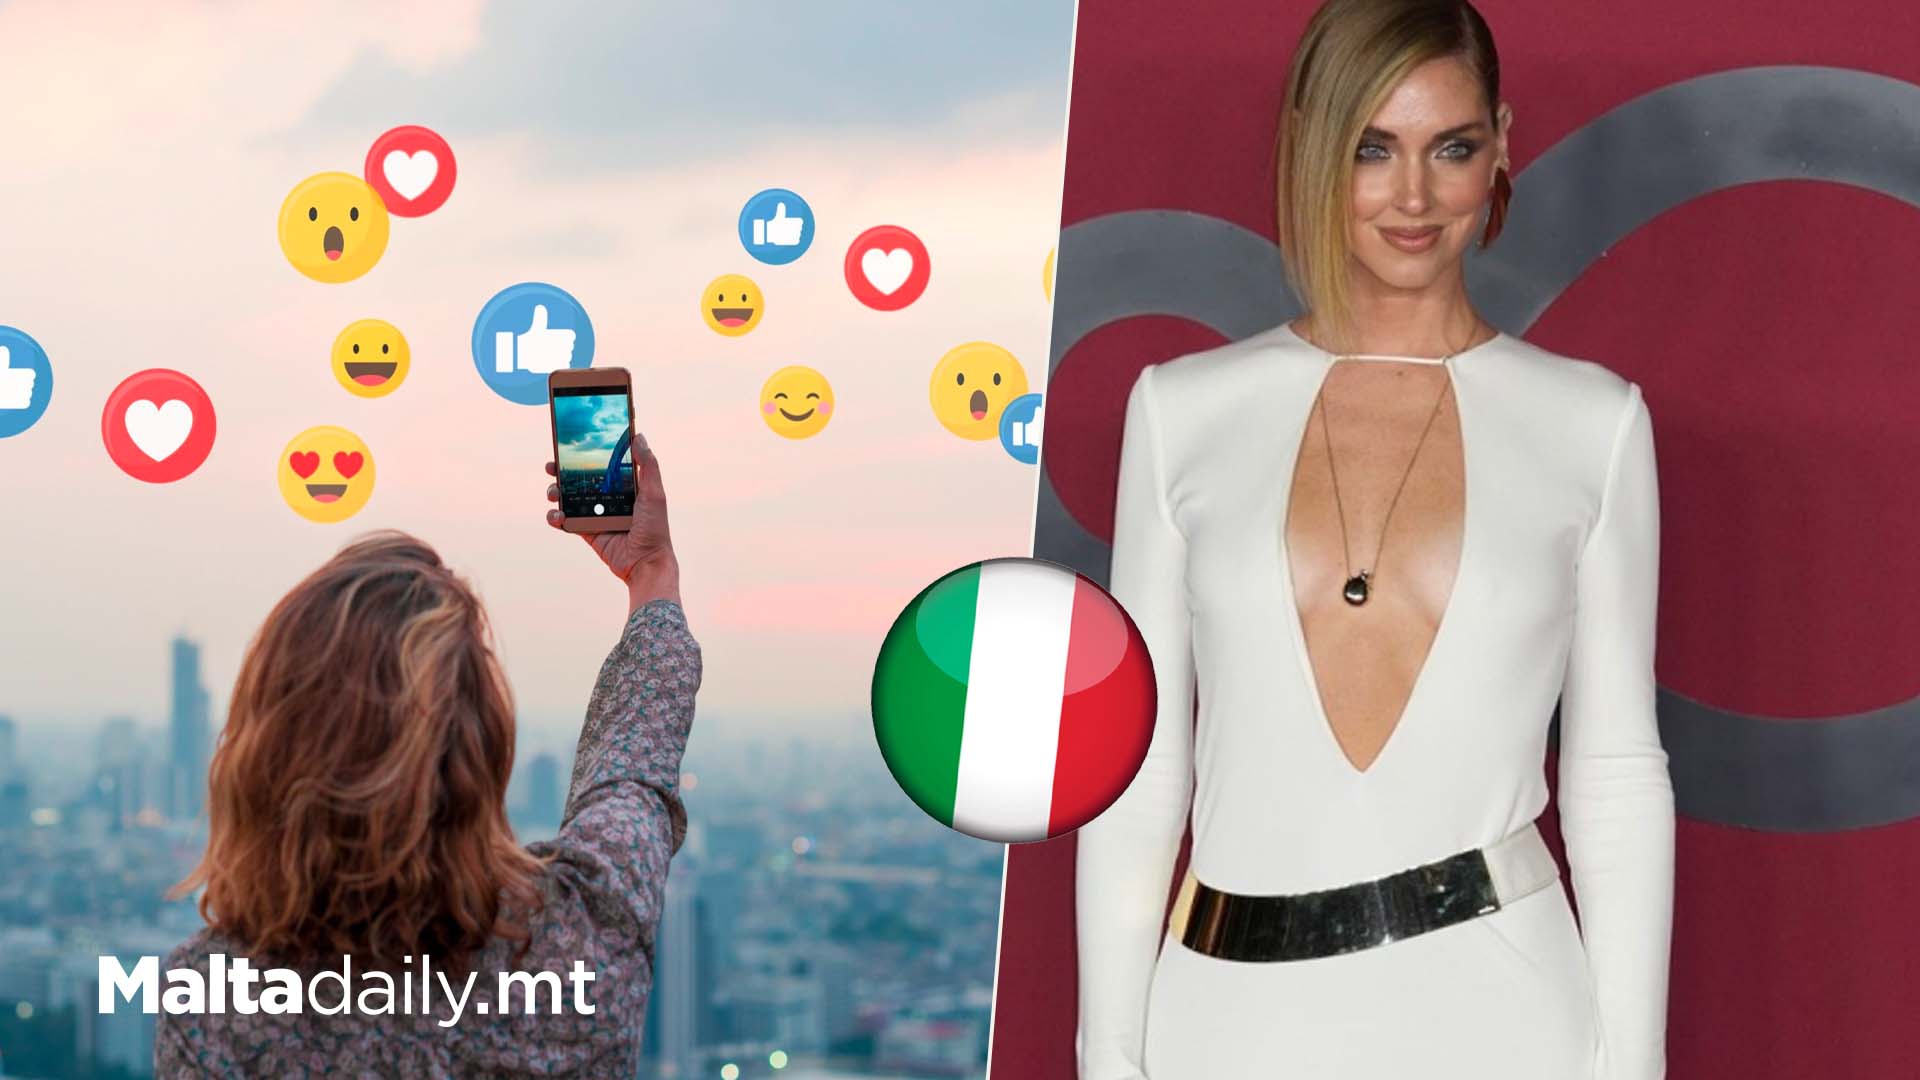 Italian Influencers To Be Fined If Collaborations Not Labelled Properly